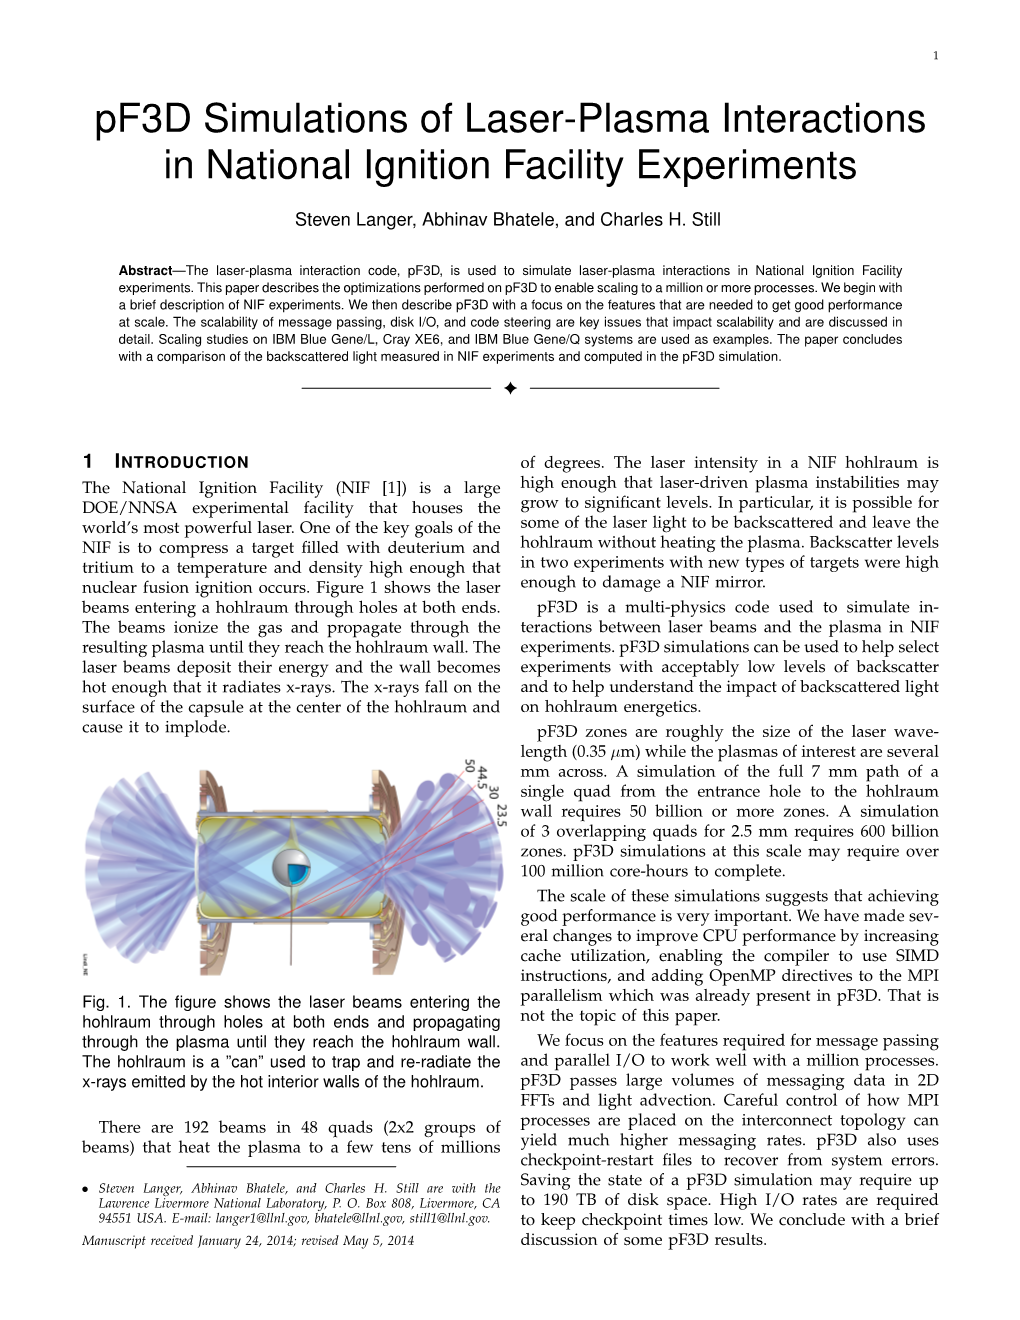 Pf3d Simulations of Laser-Plasma Interactions in National Ignition Facility Experiments